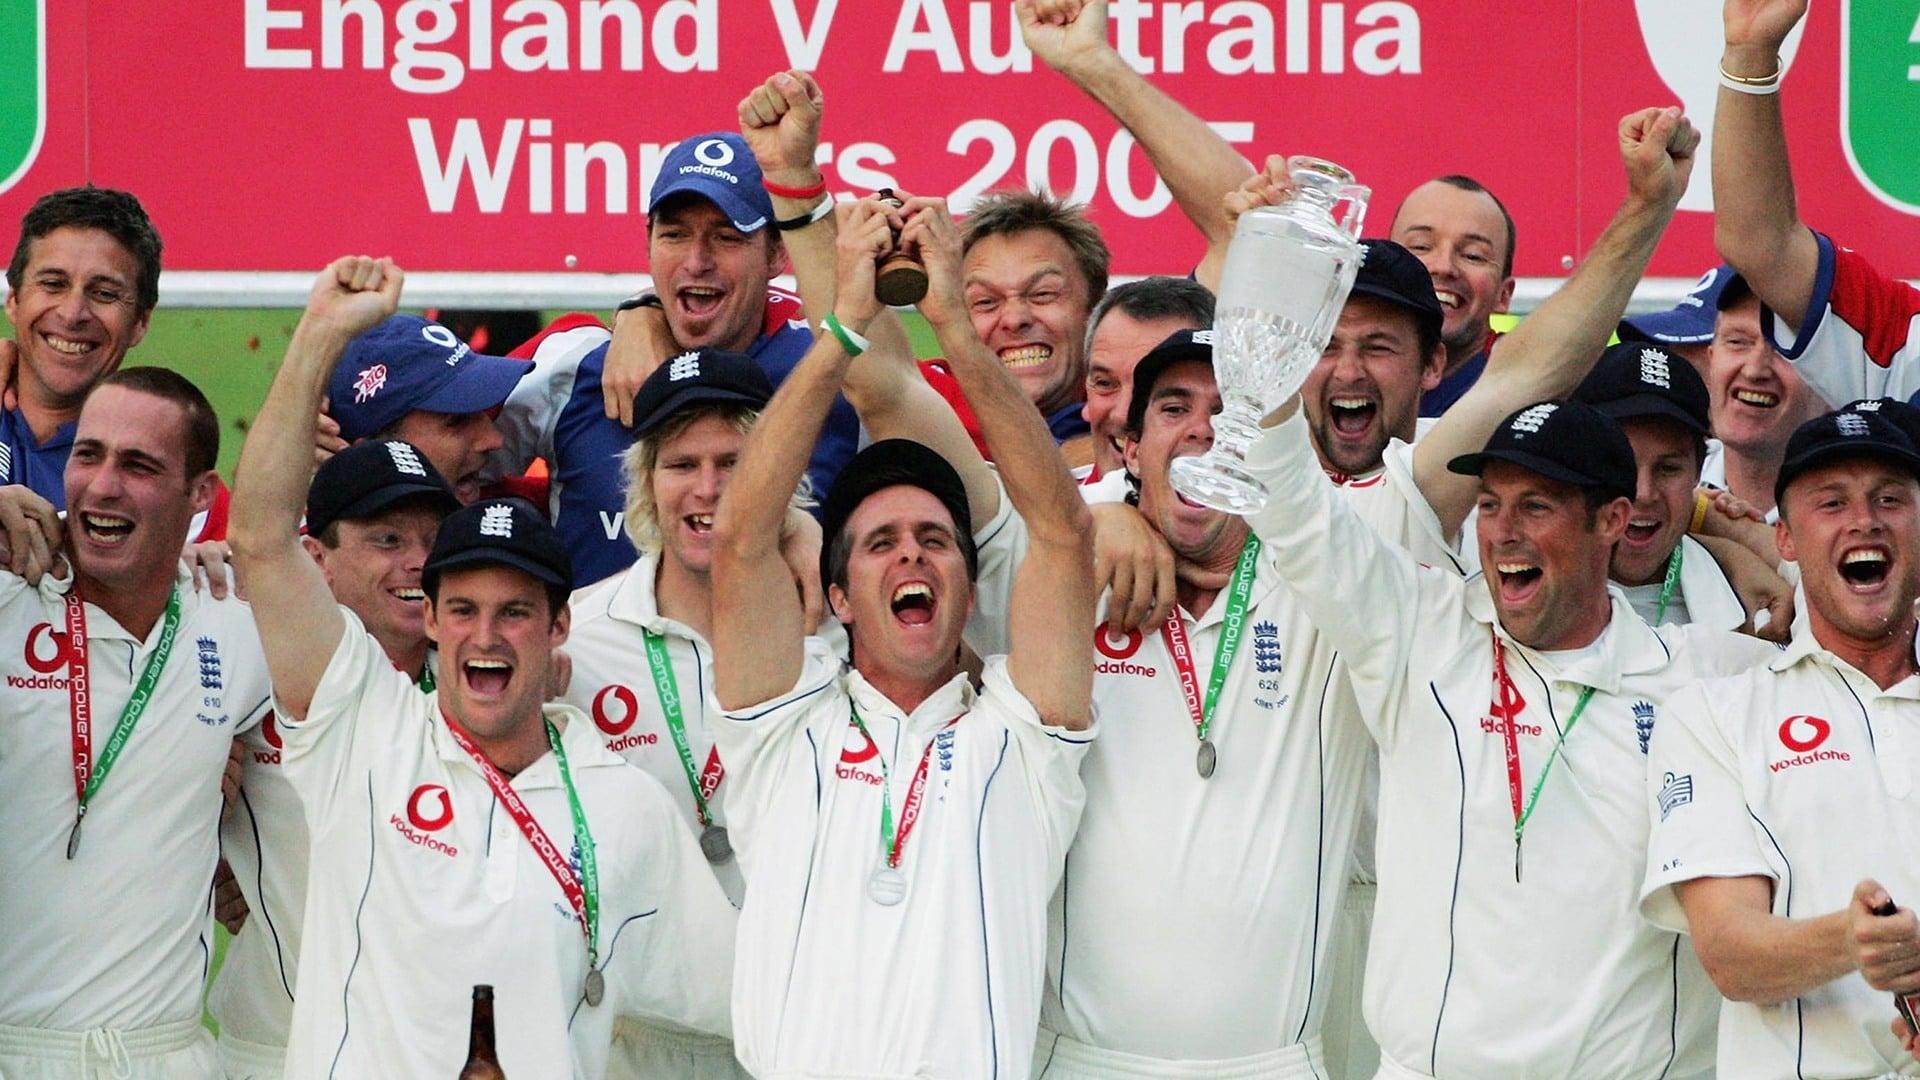 The Ashes – The Greatest Series - 2005 backdrop